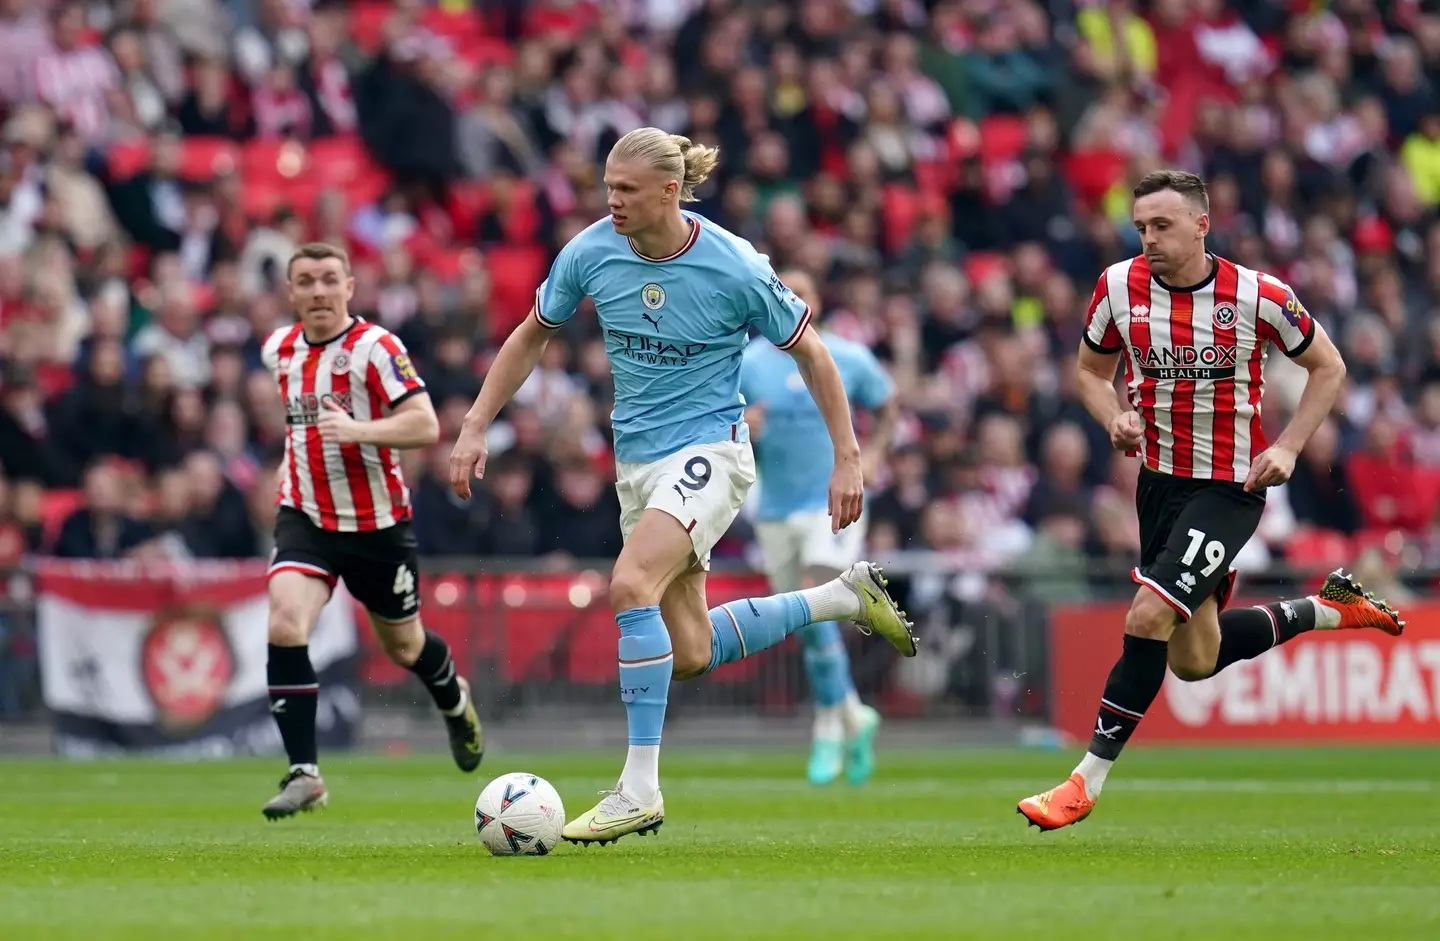 Erling Haaland in action for Manchester City